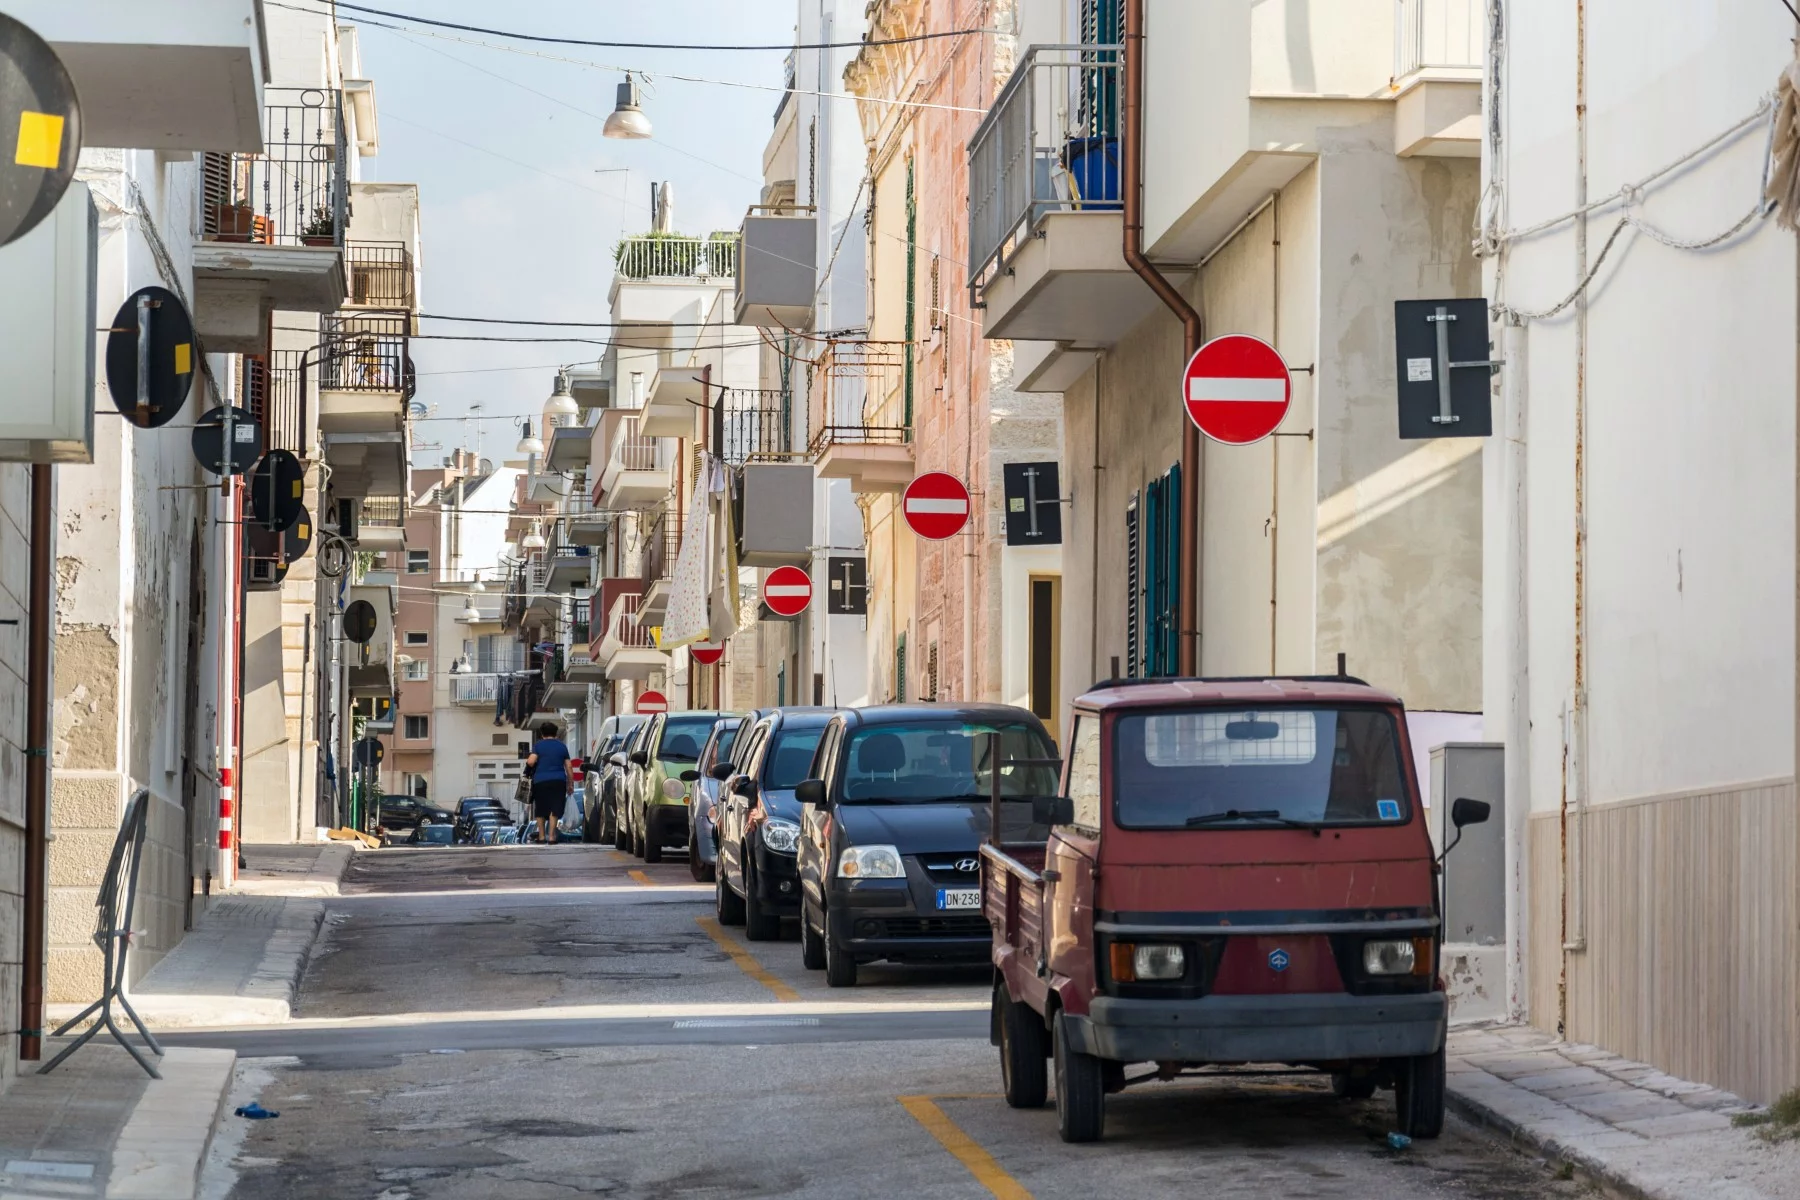 Woman walking along parked cars on a street in Polignano a Mare, Italy, with many no entry traffic signs.